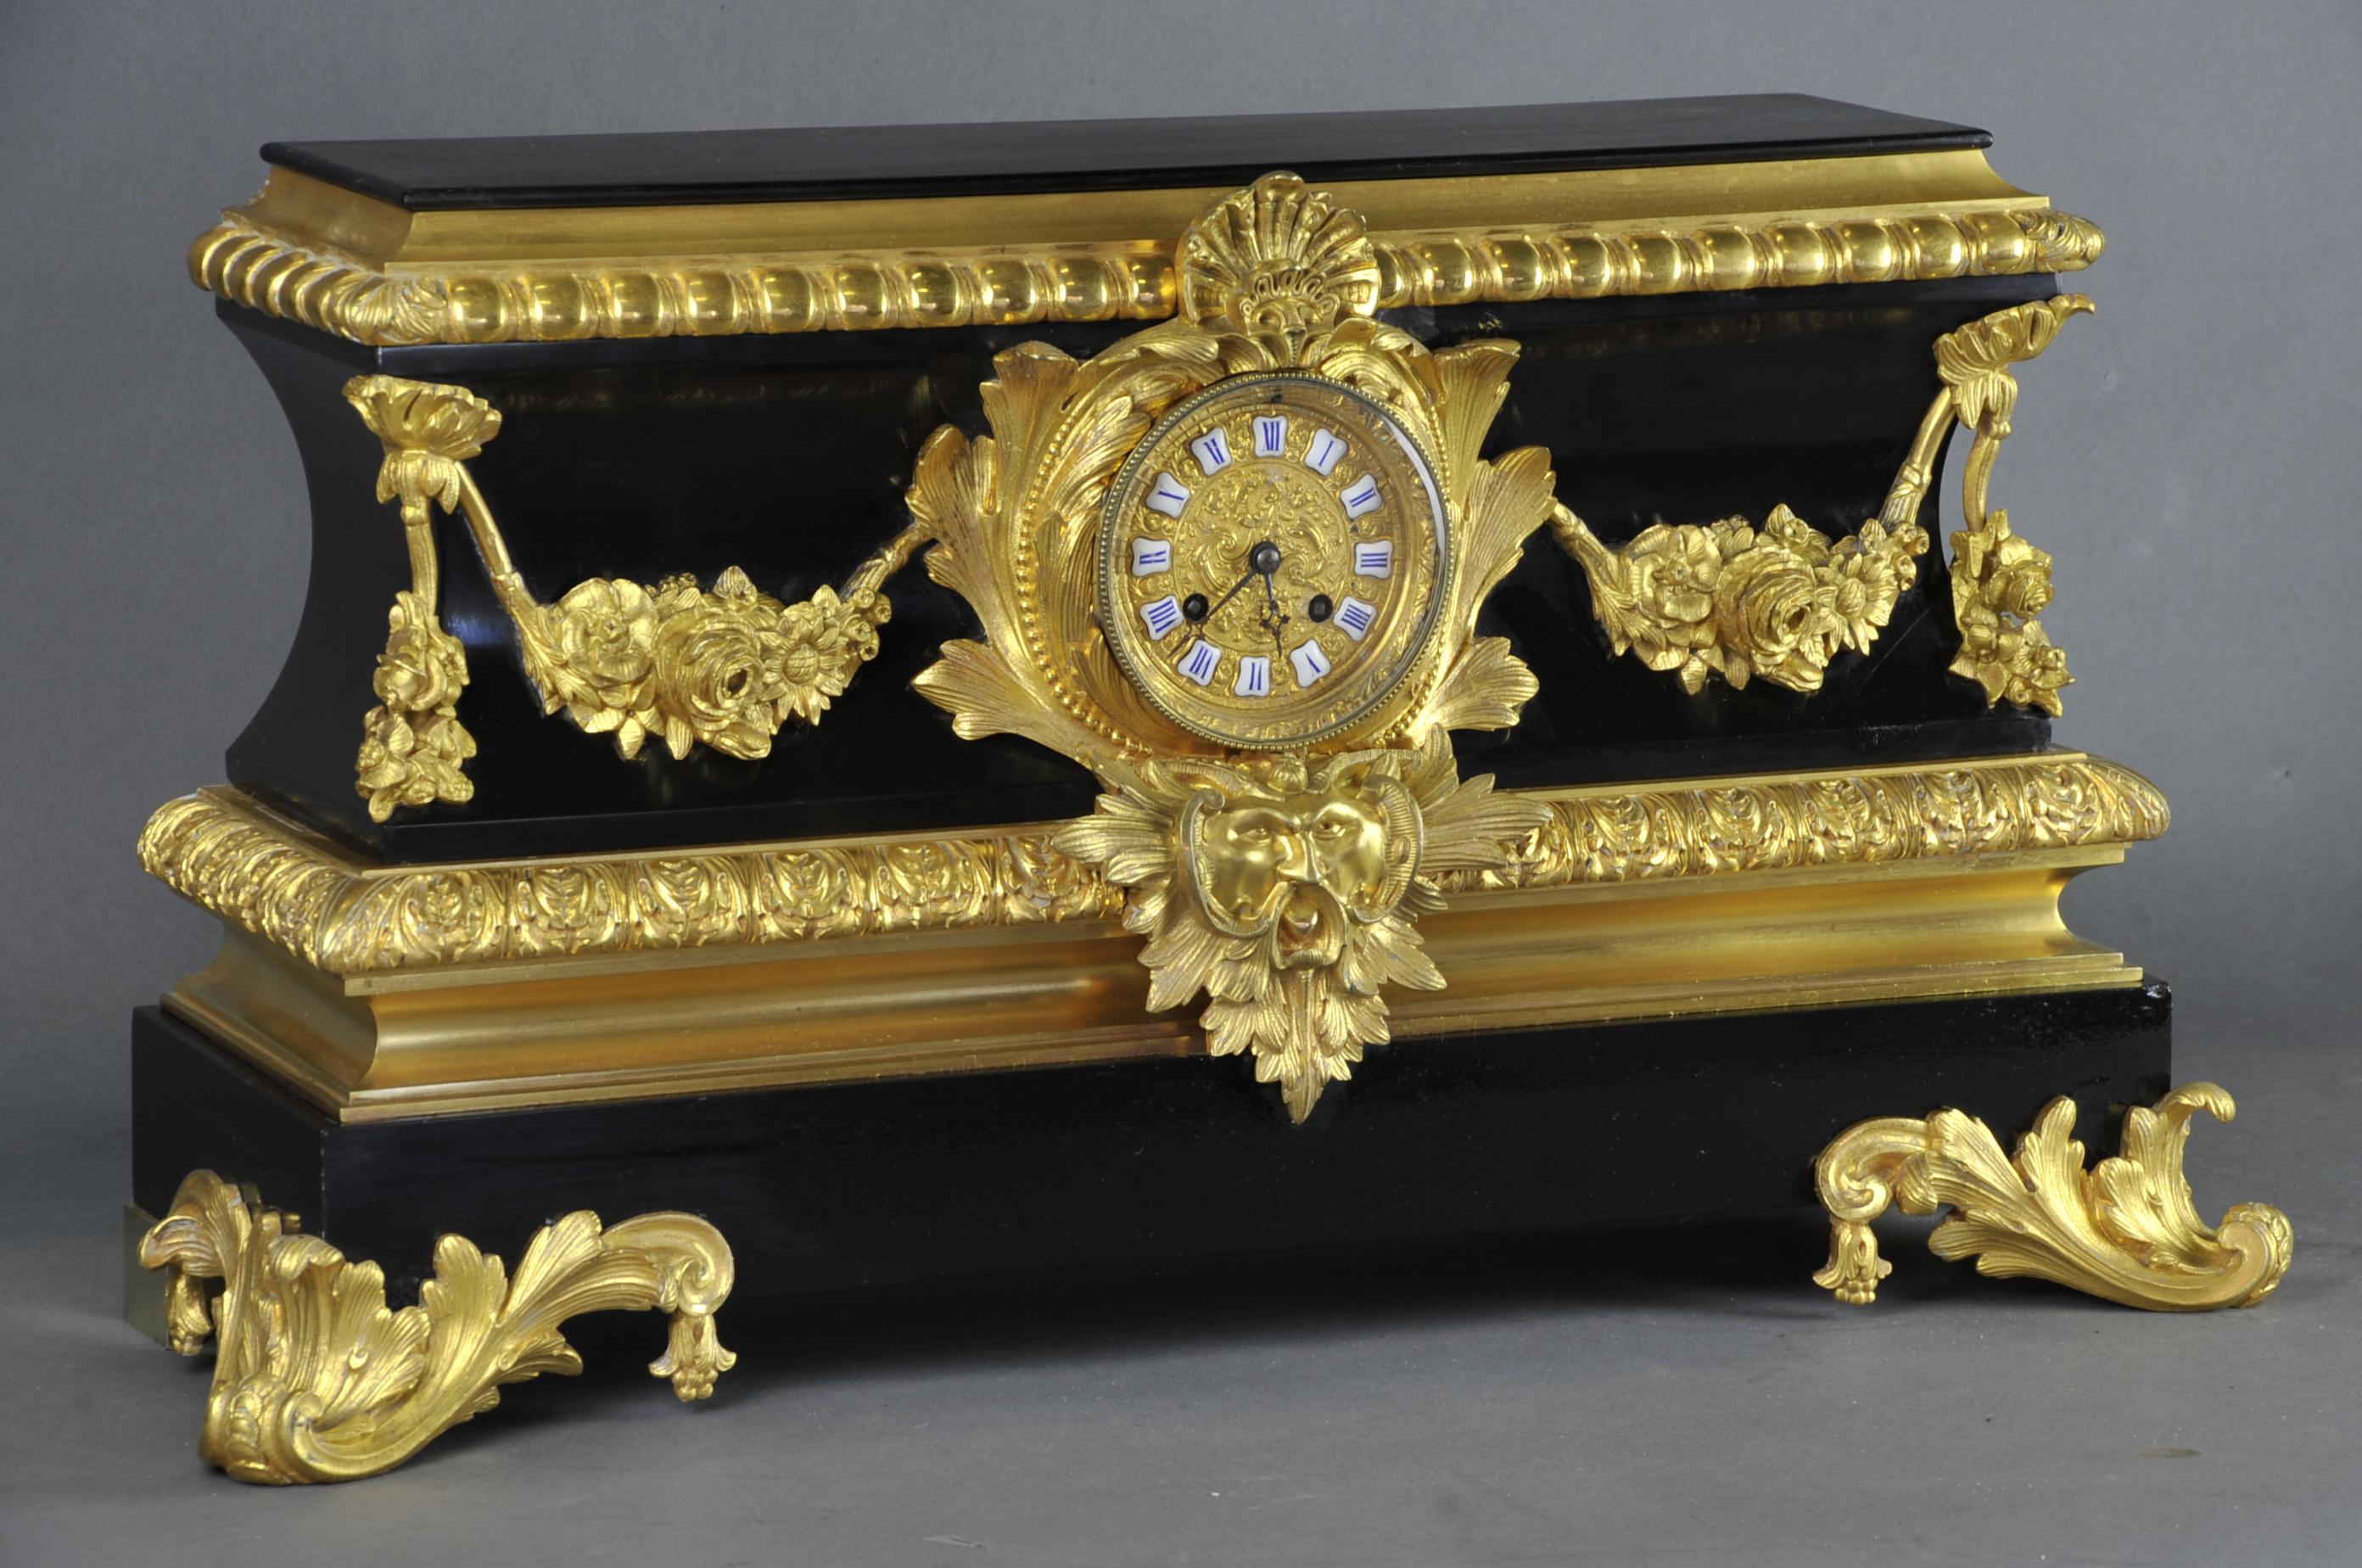 French Large Napoleon III Clock in Black Belgian Marble and Gilt Bronze by Raingo Frère